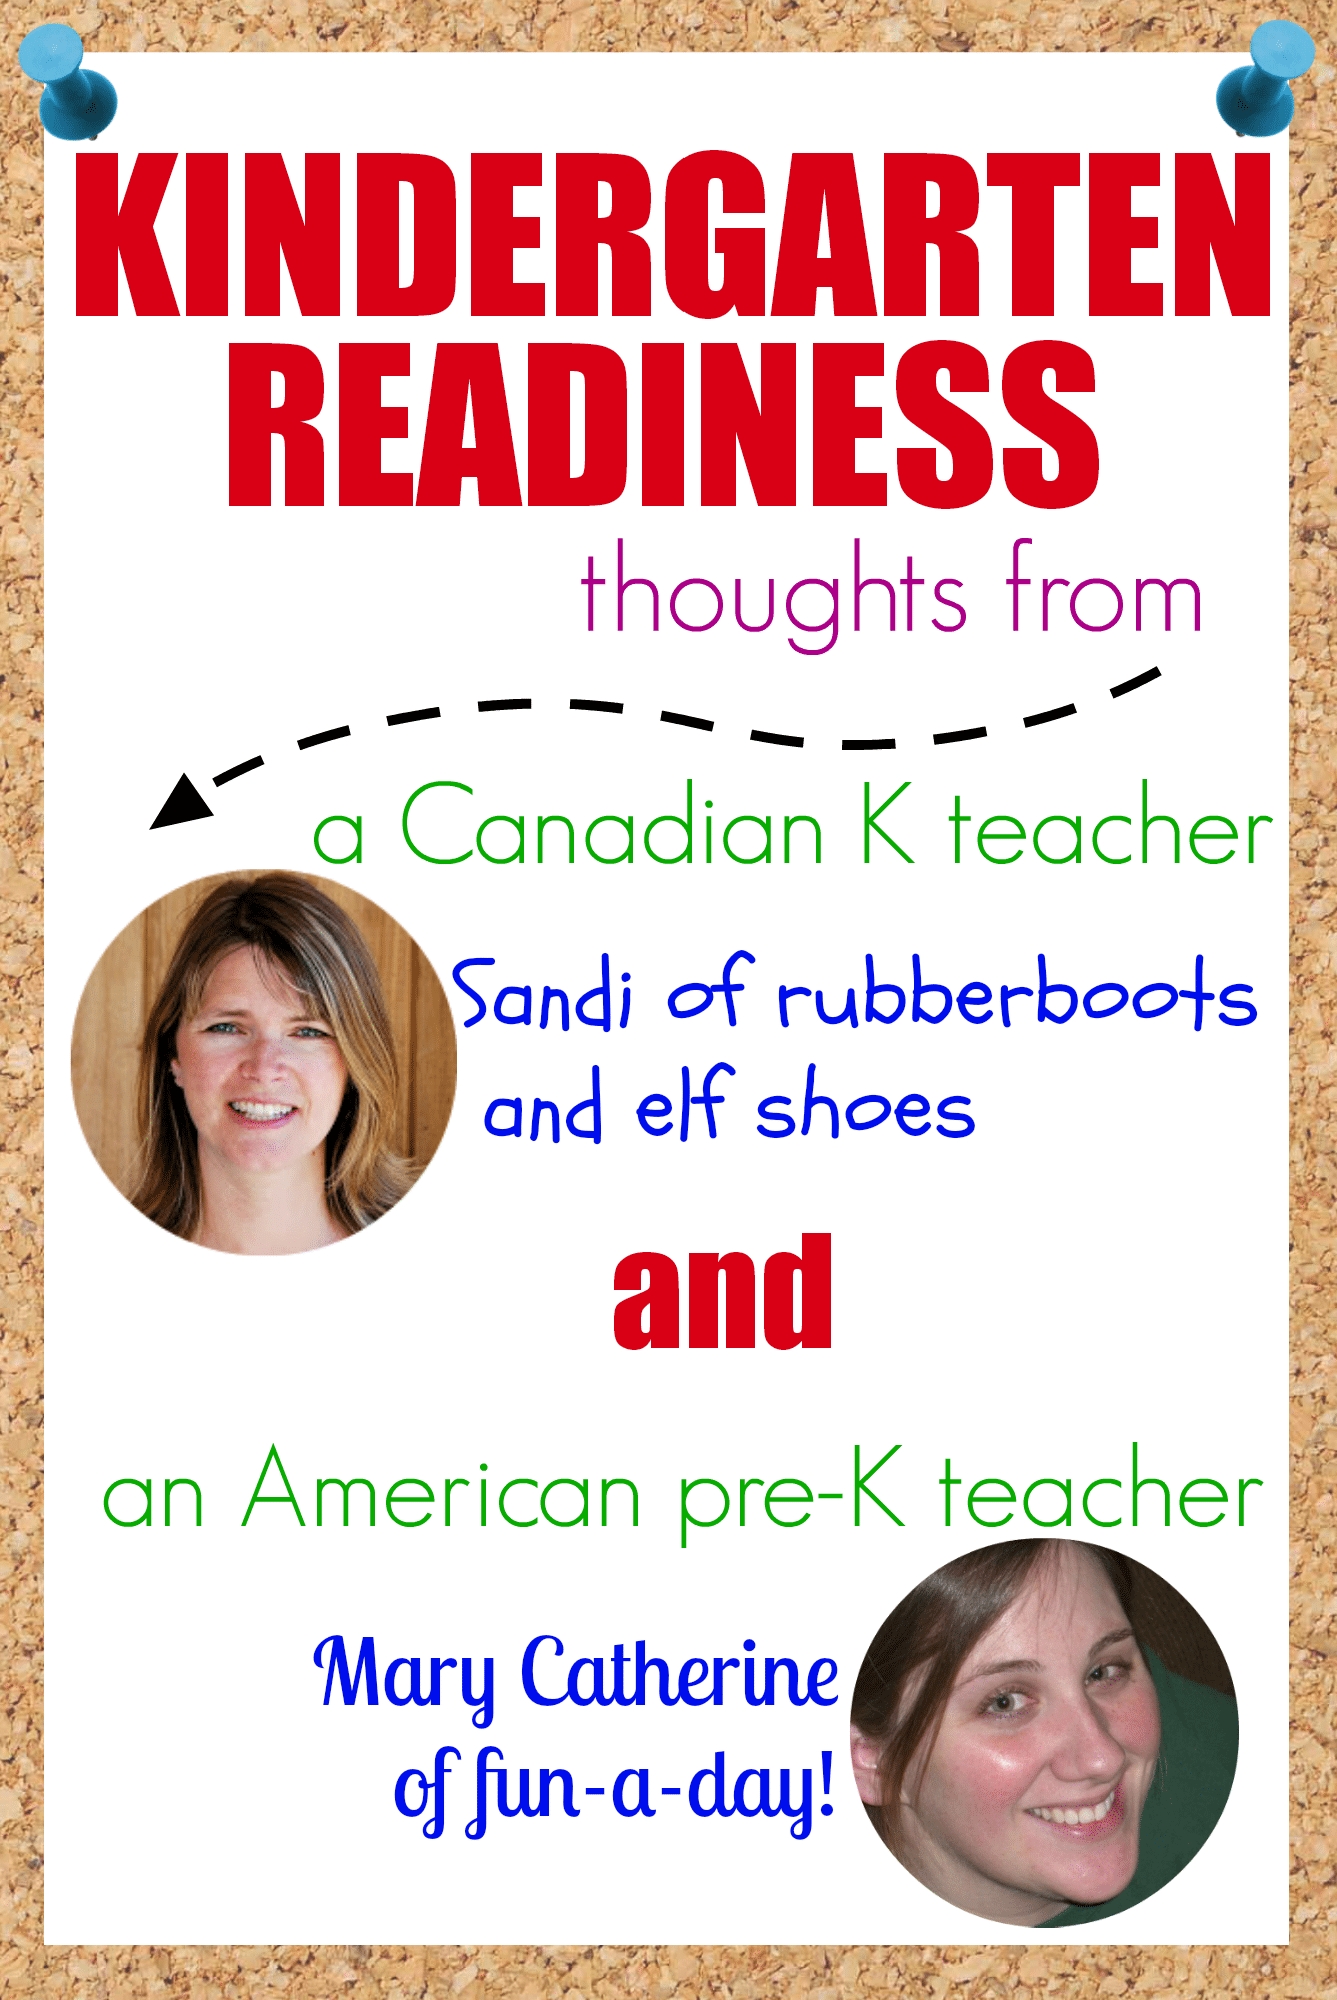 Ready for Kindergarten - What kids really need